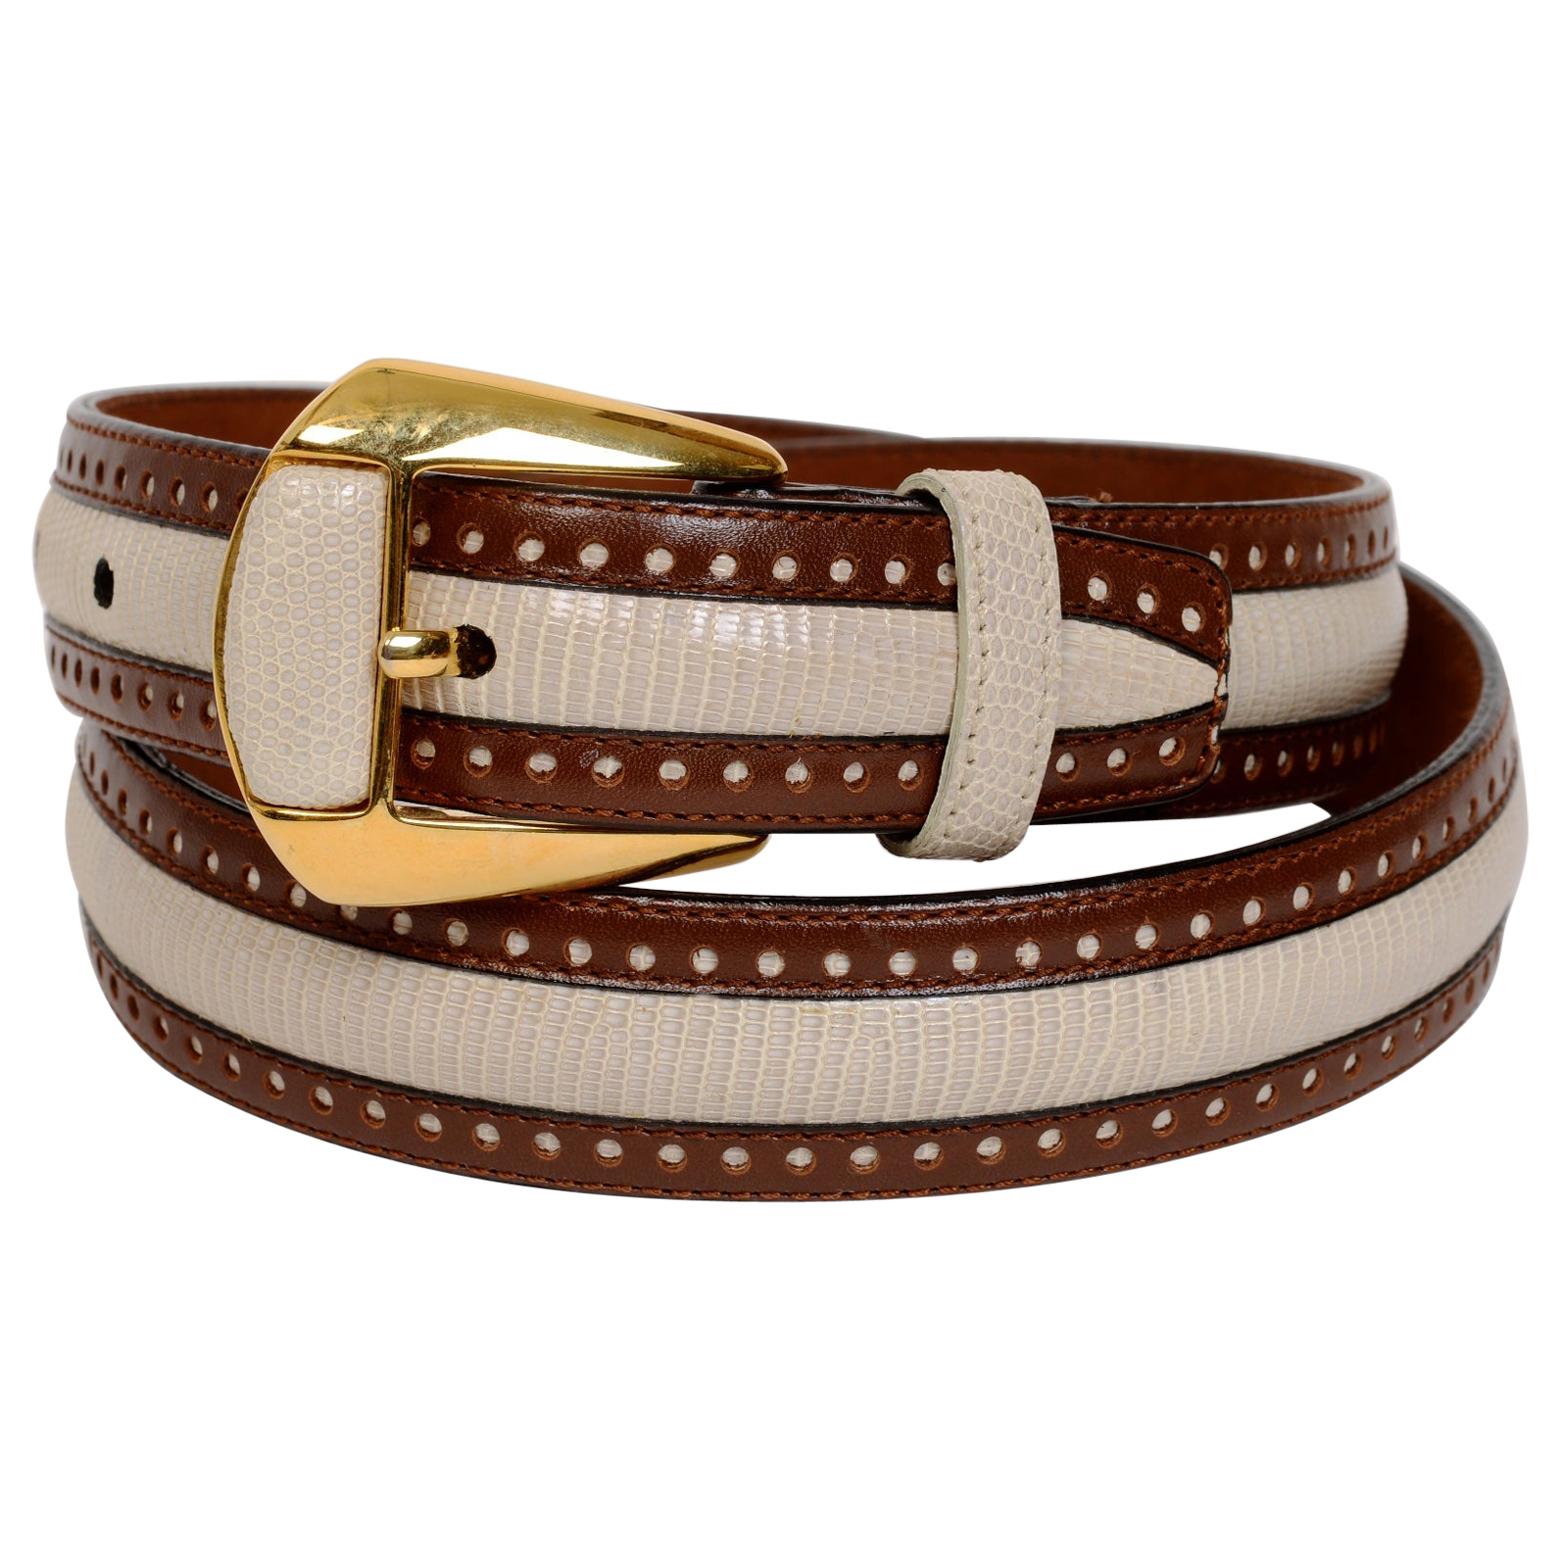 White Lizard and Brown Leather Belt by Giorgio's Worth Ave Palm Beach, Brand New